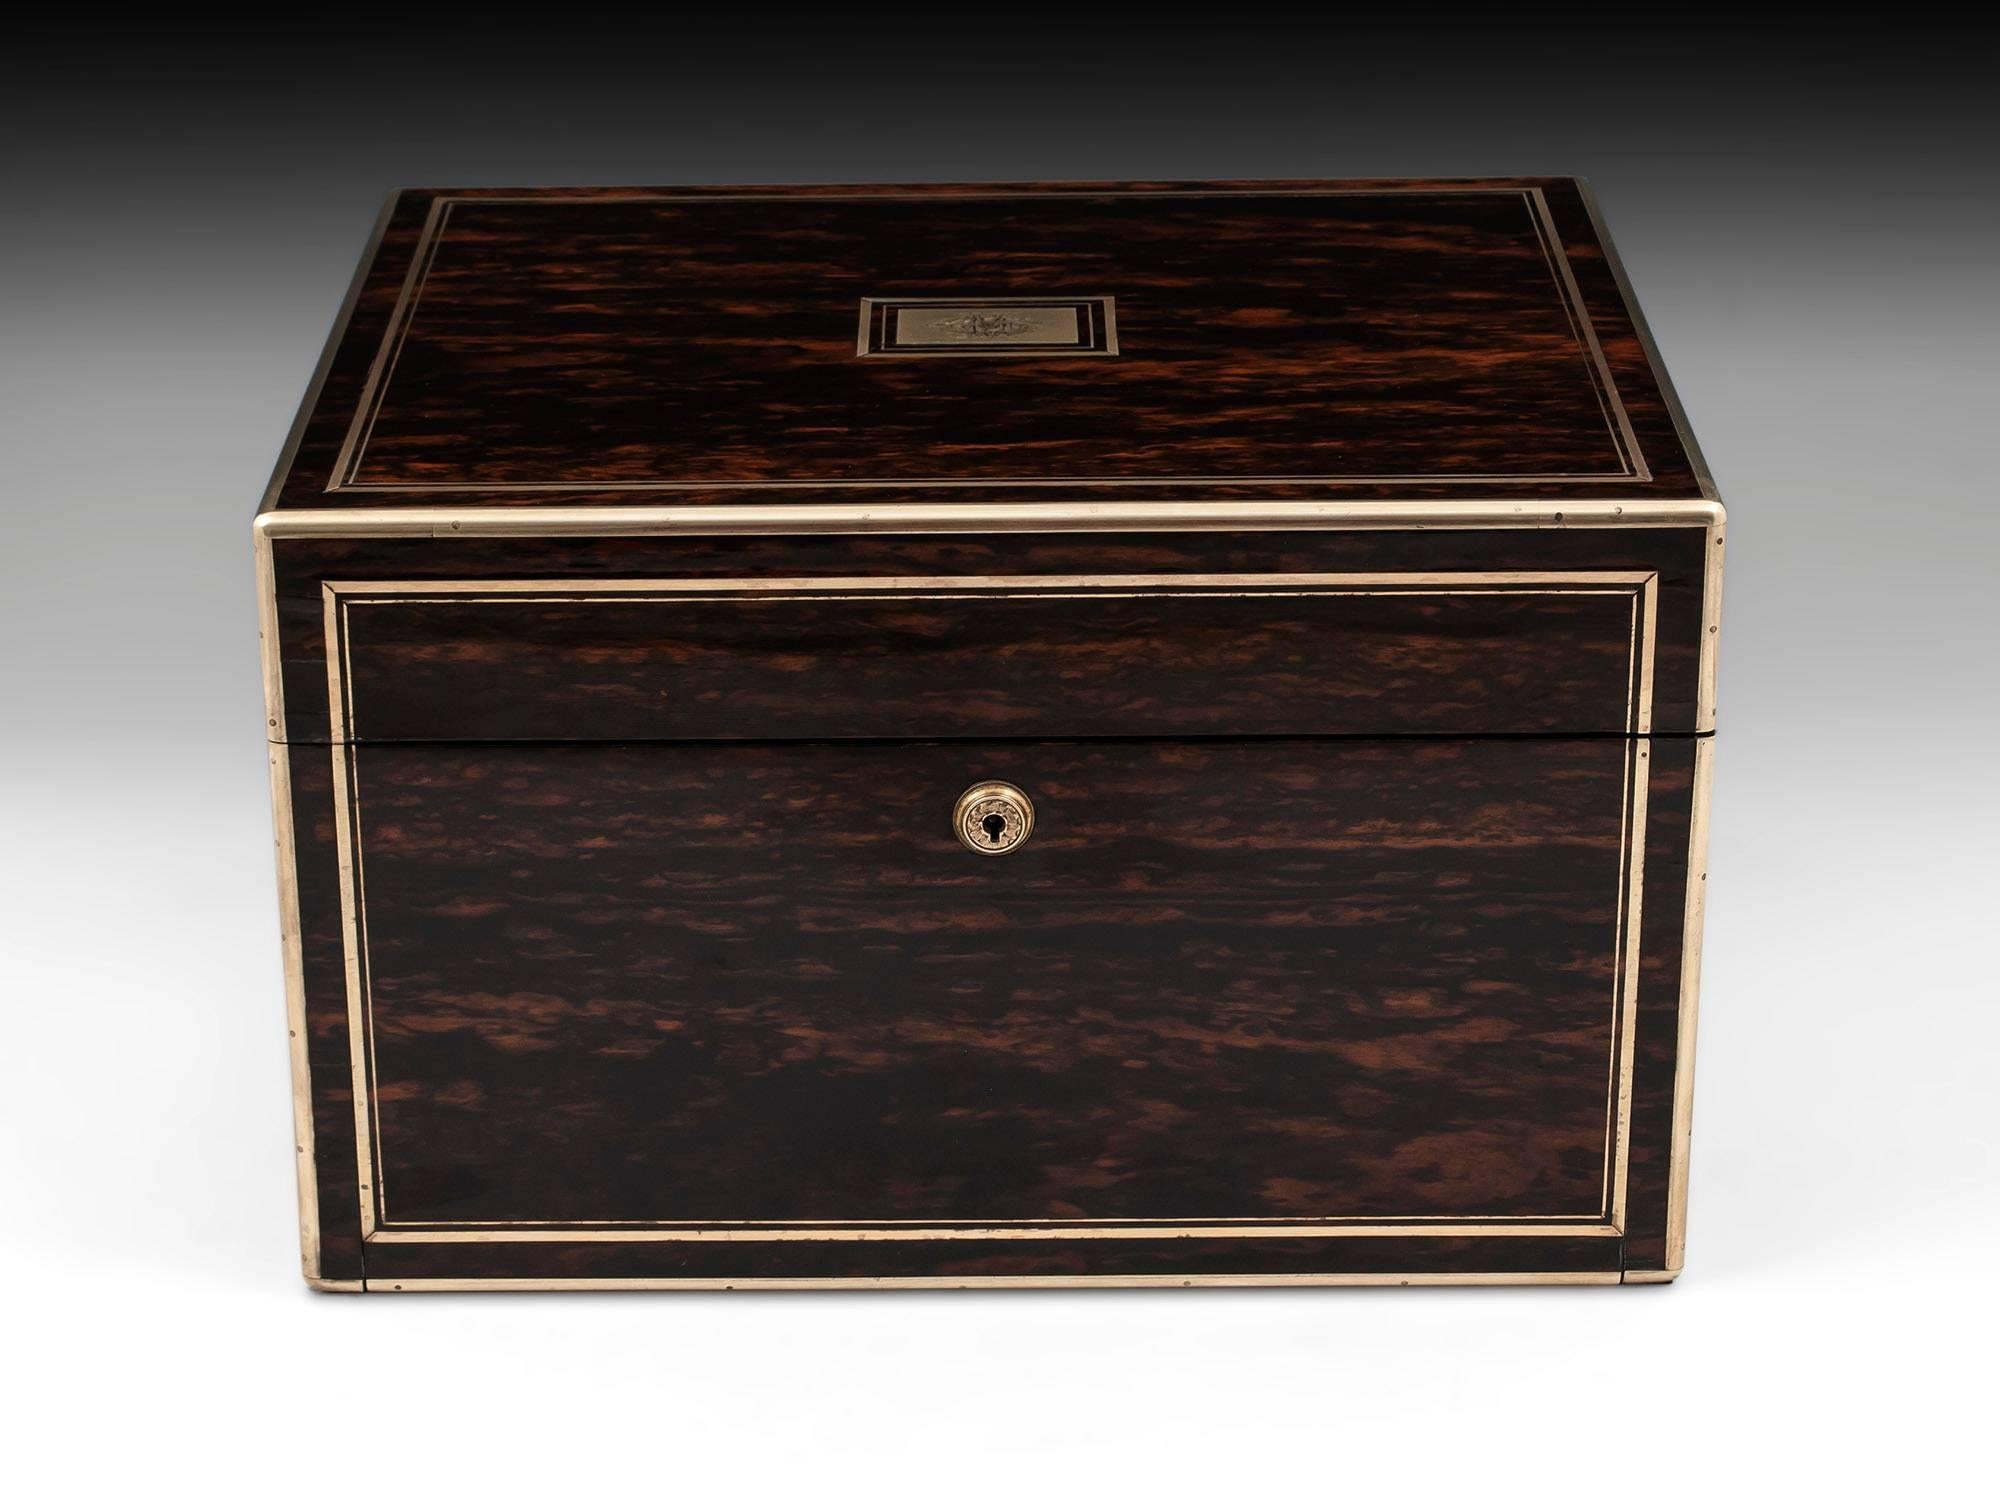 Sterling silver vanity box veneered in stunning Coromandel, bound and double strung in brass with robust campaign carry-handles and engraved escutcheon. The interior features twelve hobnail cut glass containers with elaborately engraved silver lids